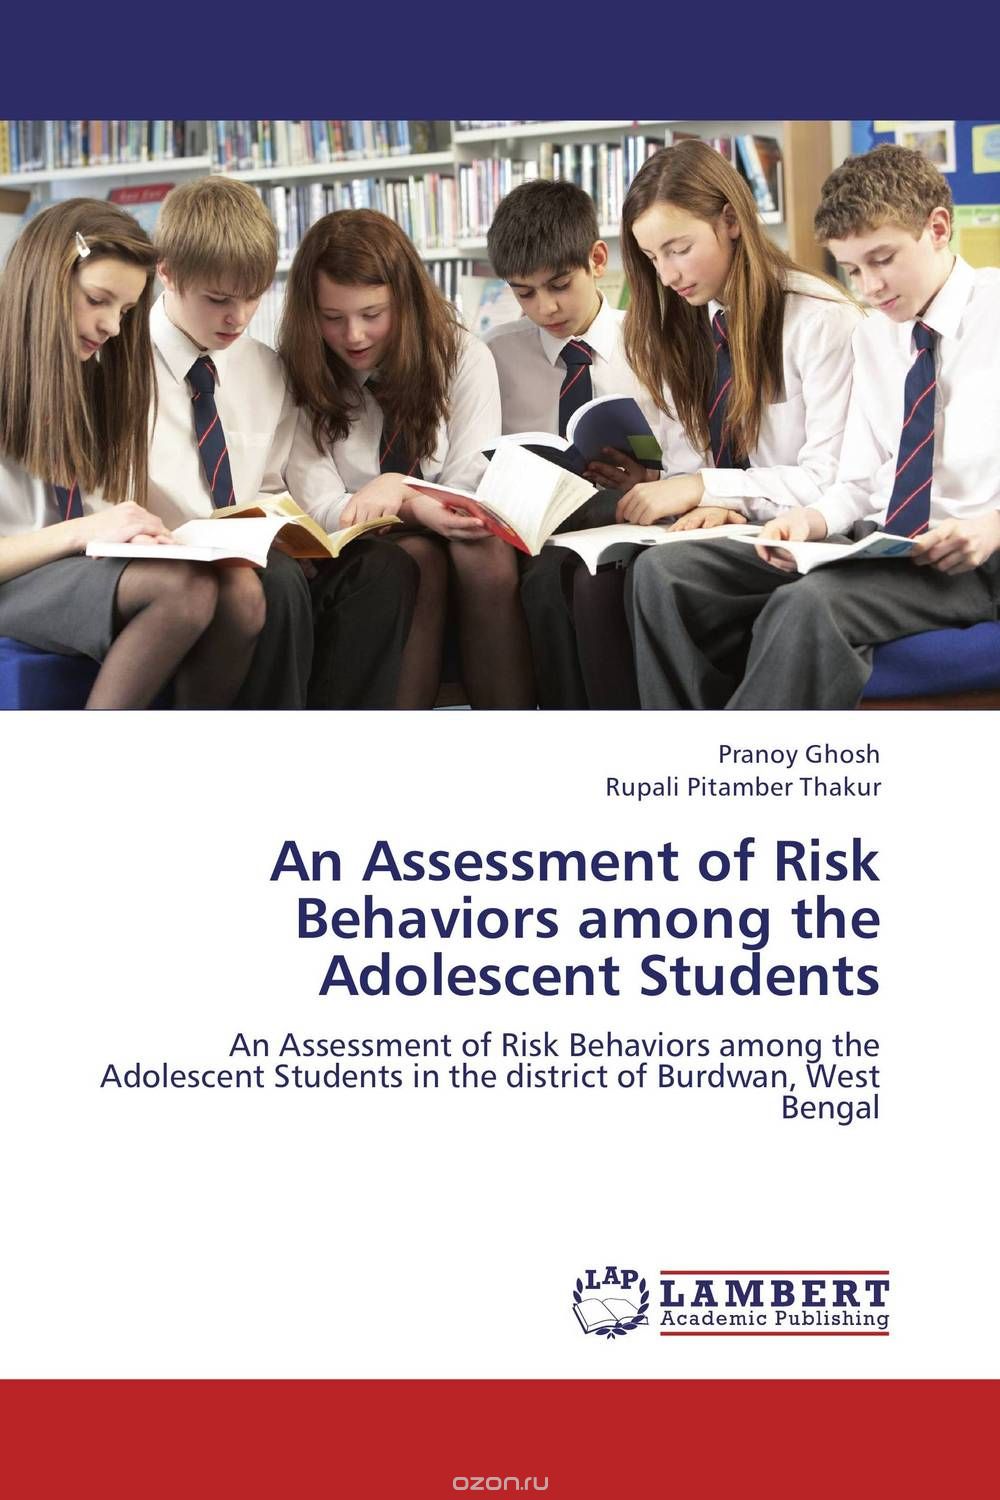 An Assessment of Risk Behaviors among the Adolescent Students